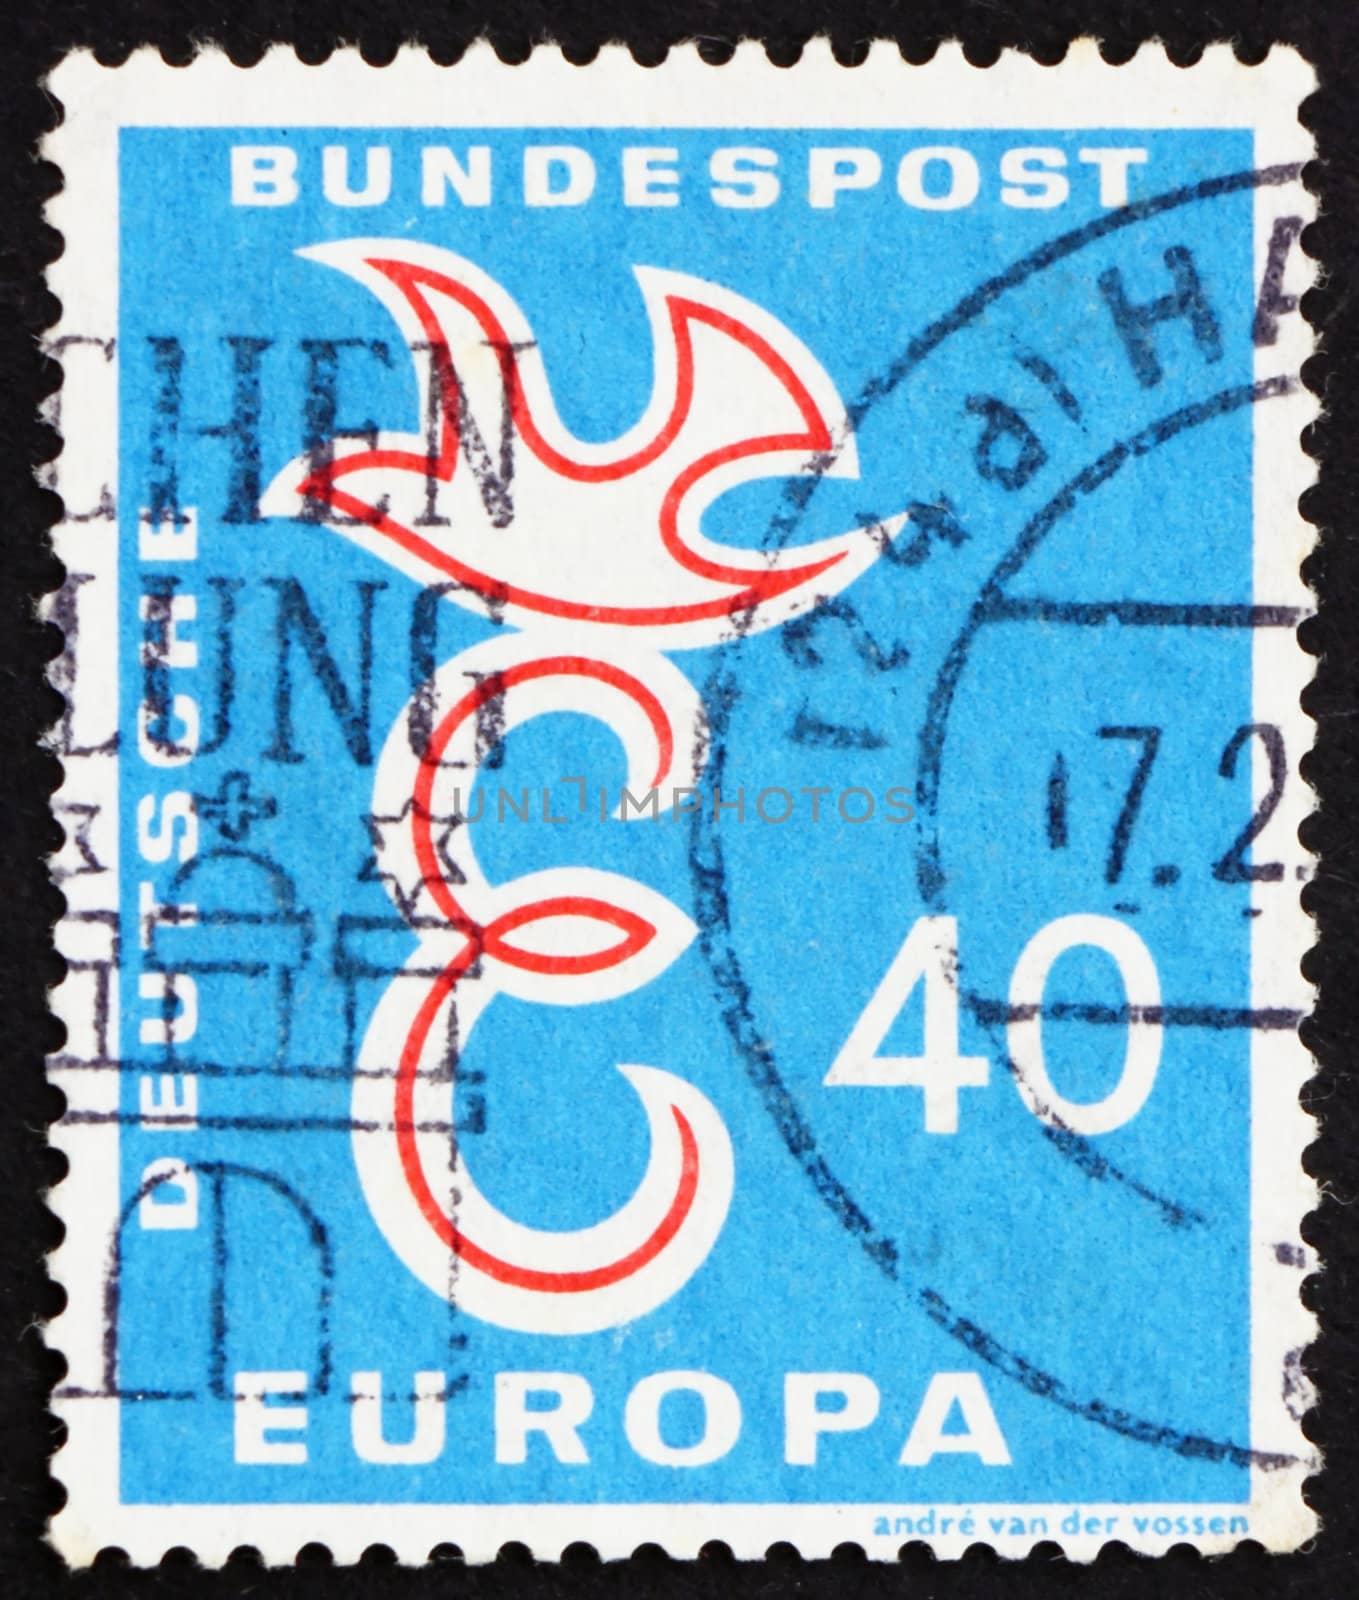 GERMANY - CIRCA 1958: a stamp printed in the Germany shows E and Dove, European Integration, circa 1958